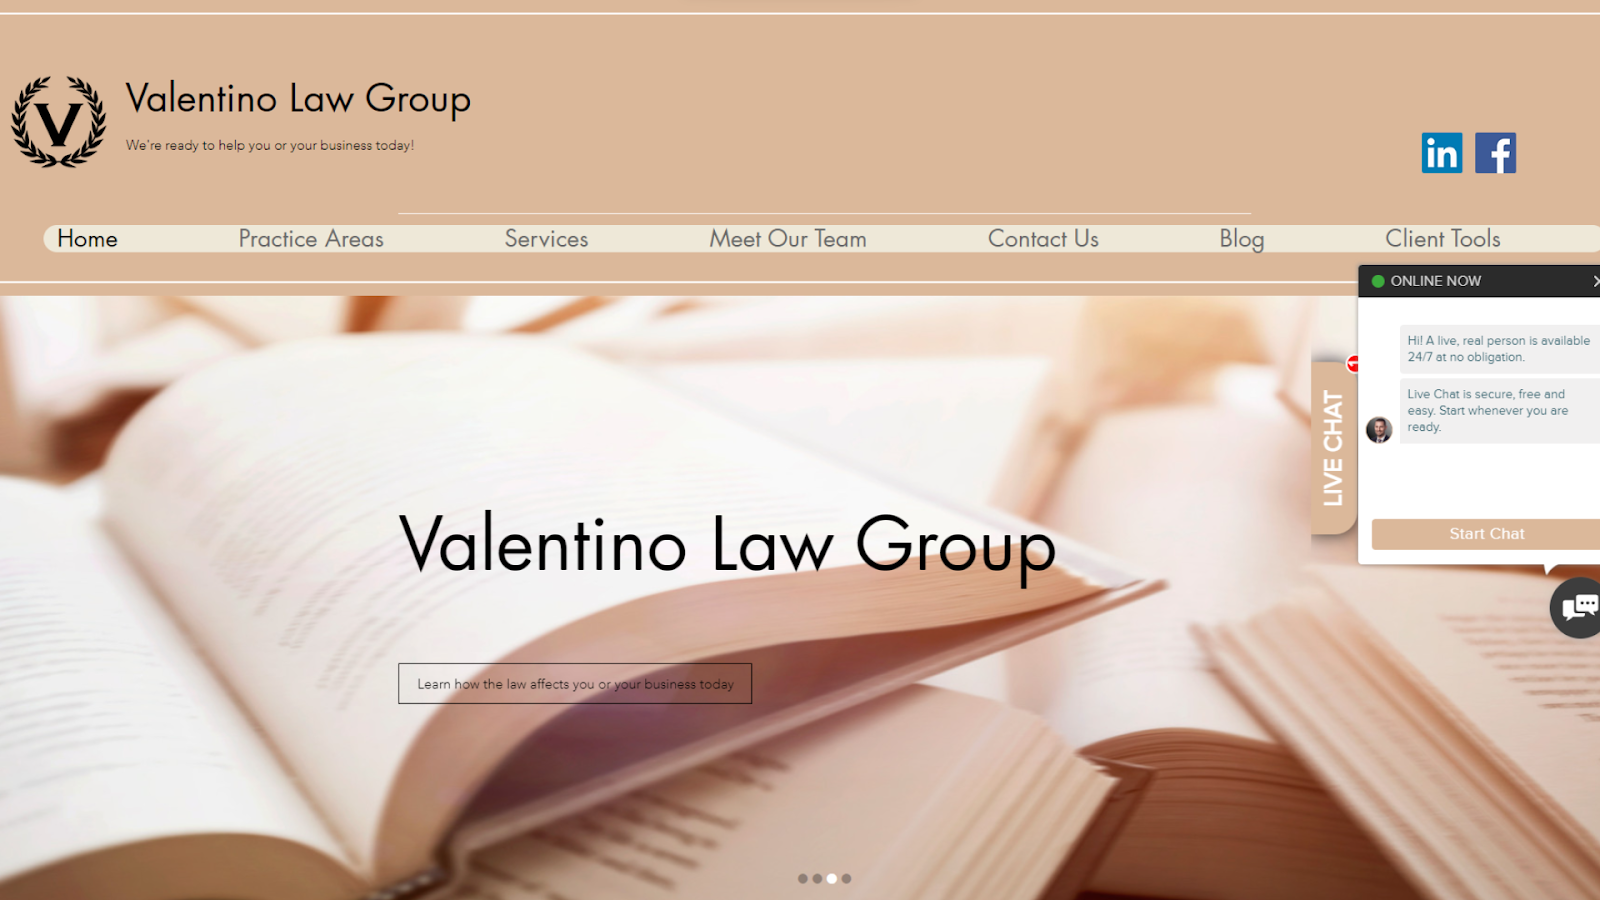 Screenshots from the Valentino Law Group website made with Wix